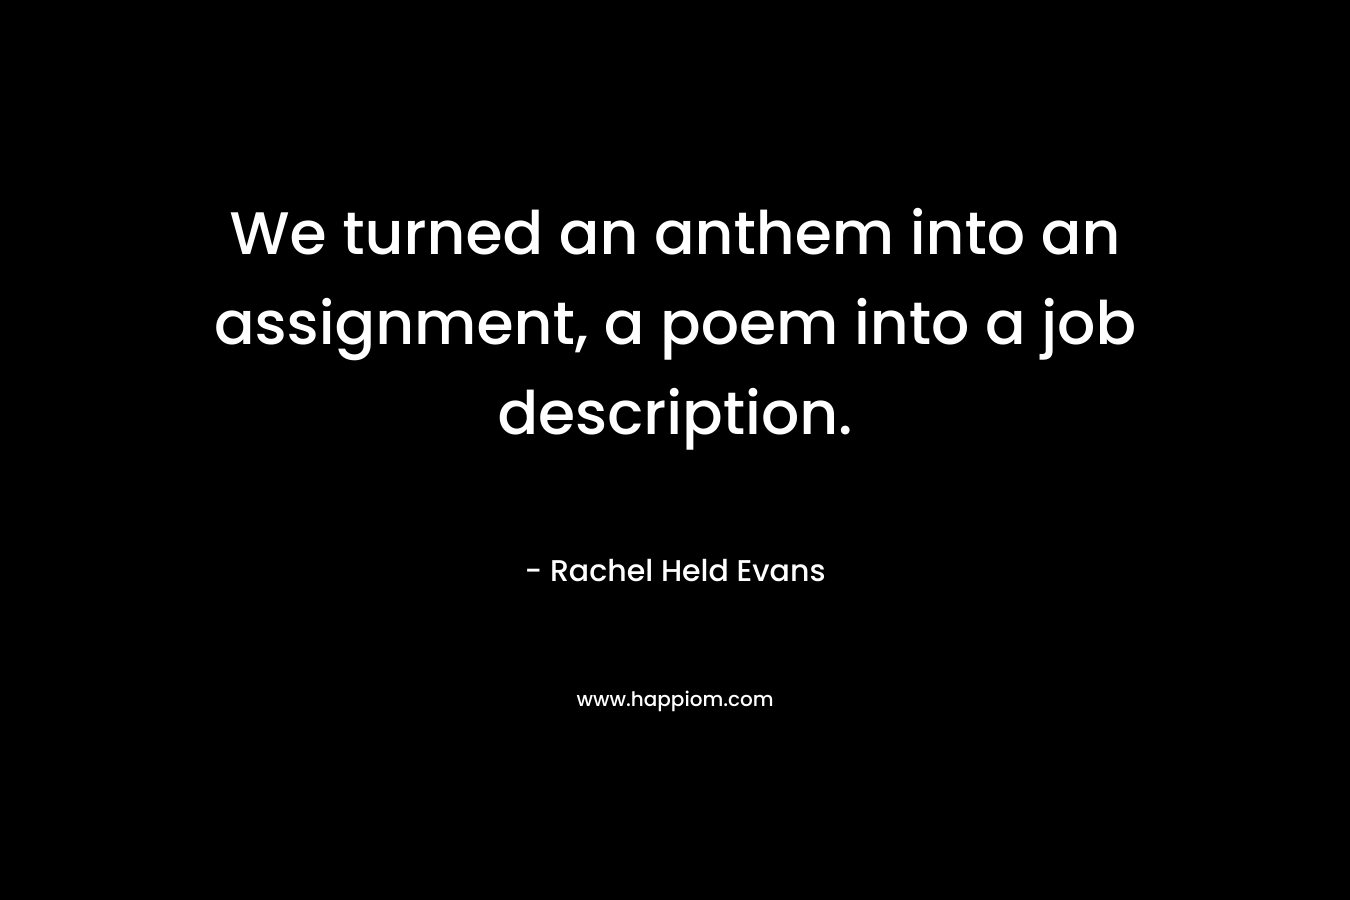 We turned an anthem into an assignment, a poem into a job description.